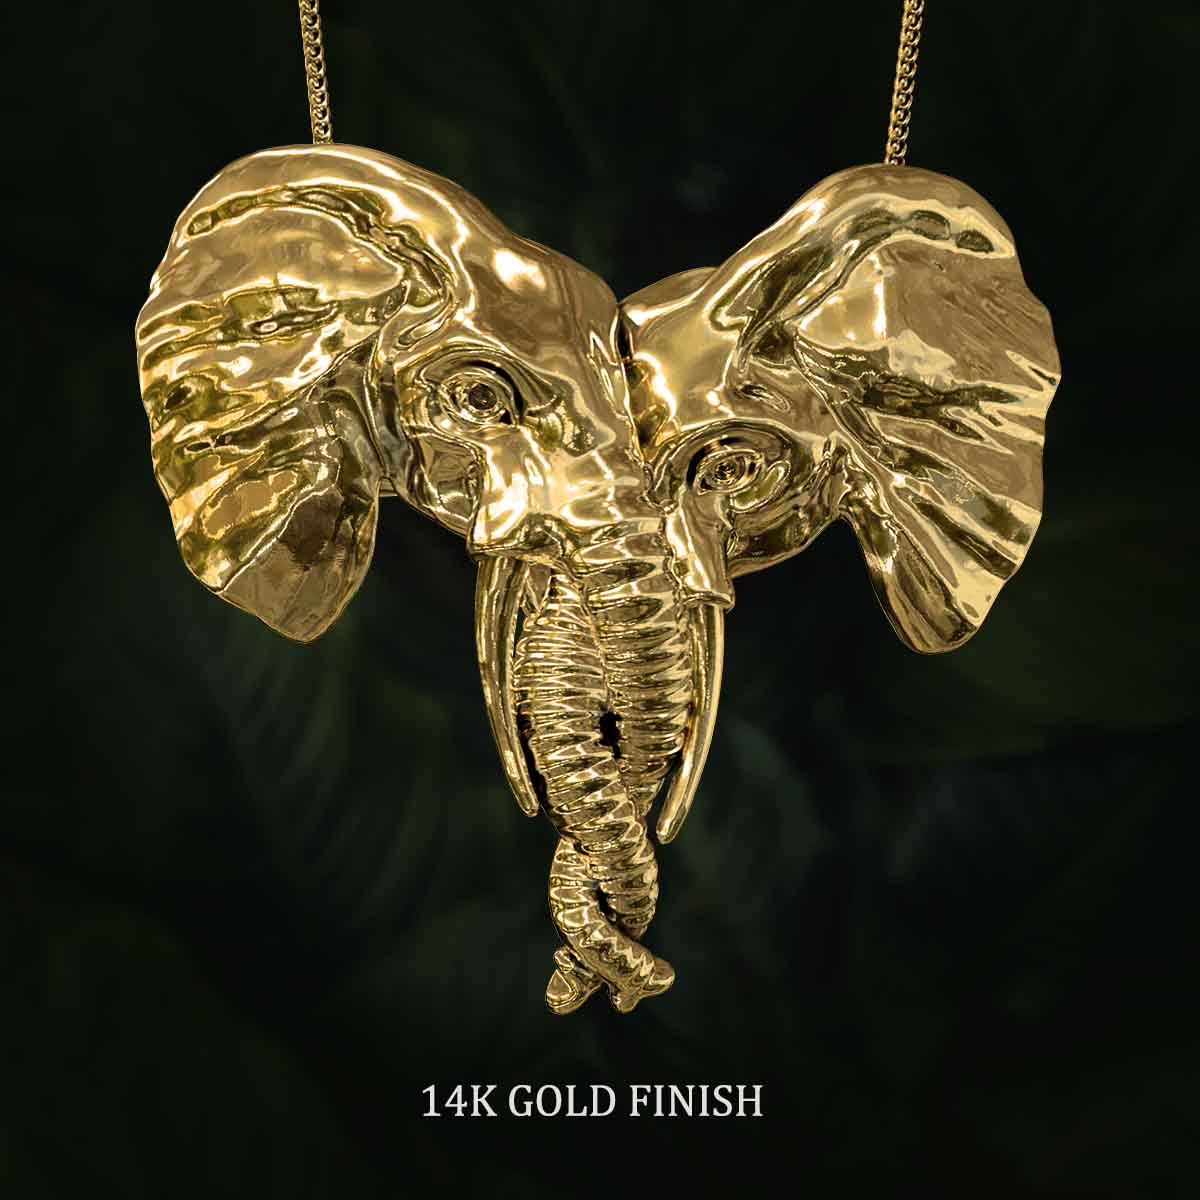 14k-Gold-Finish-Elephant-Heads-with-Trunks-Entwined-Pendant-Jewelry-For-Necklace